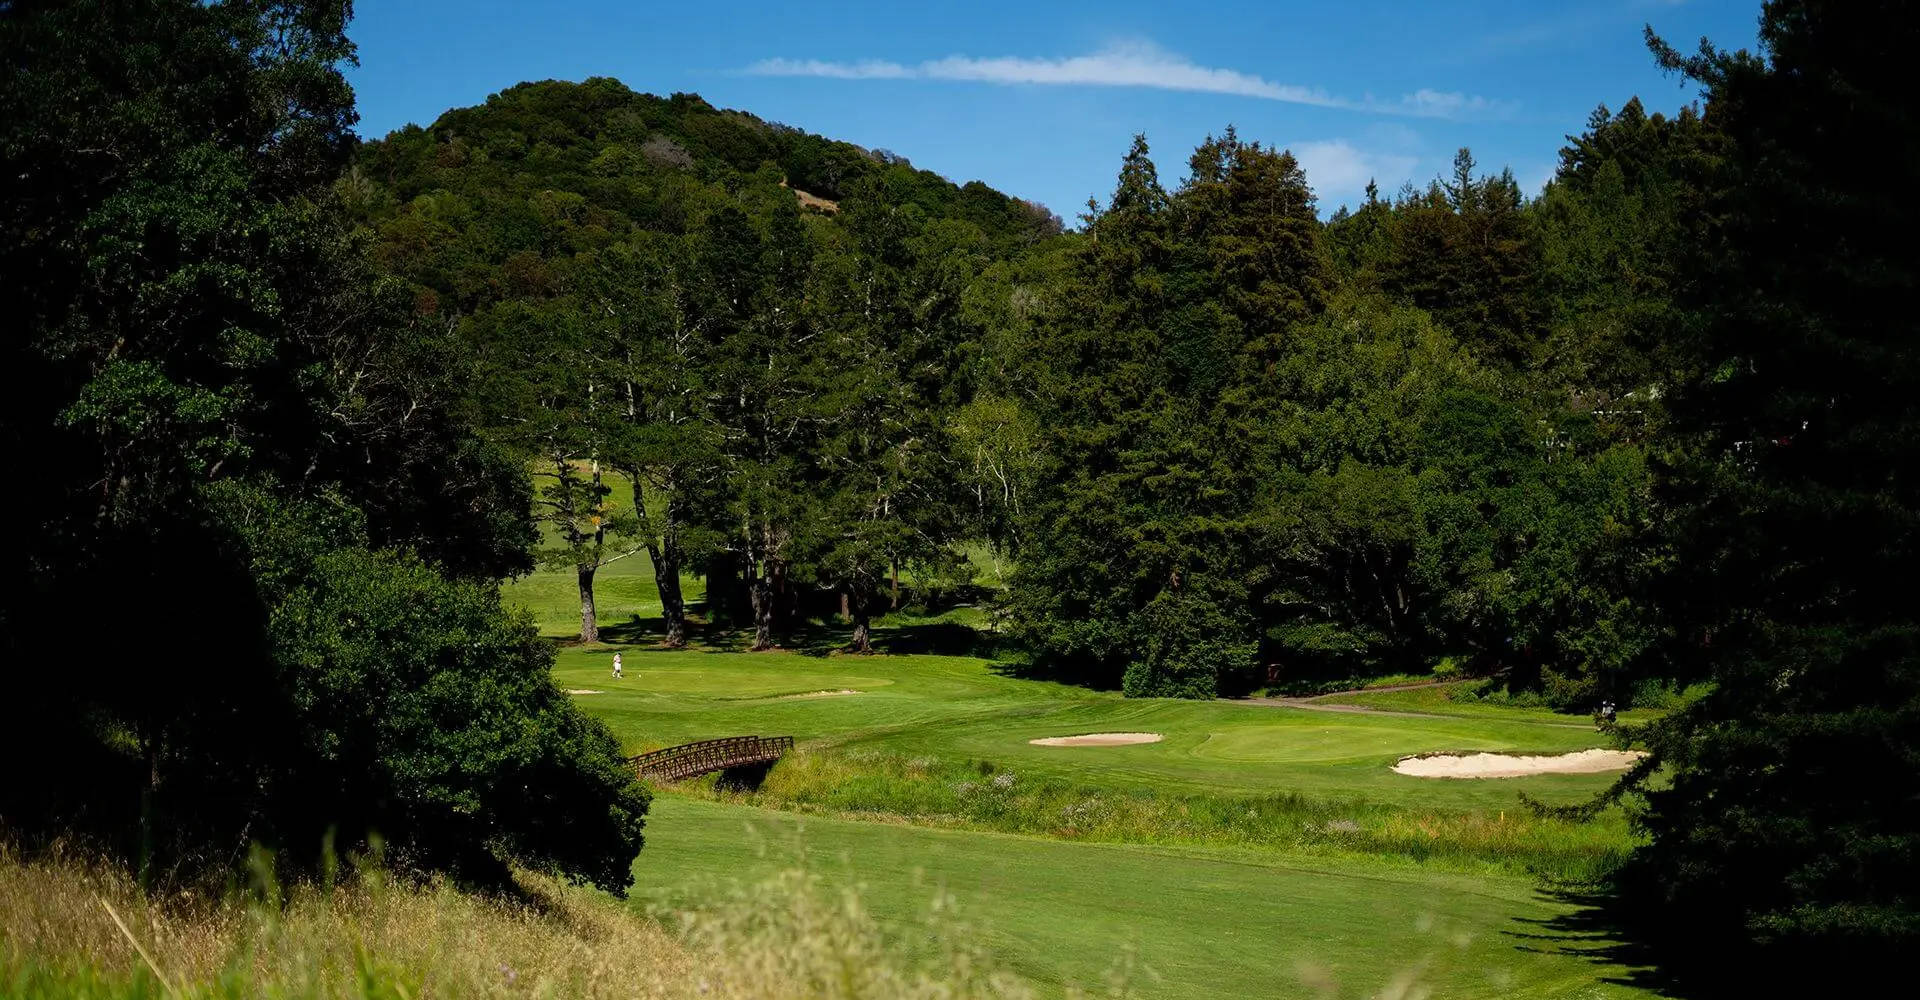 Mill Valley Golf Course